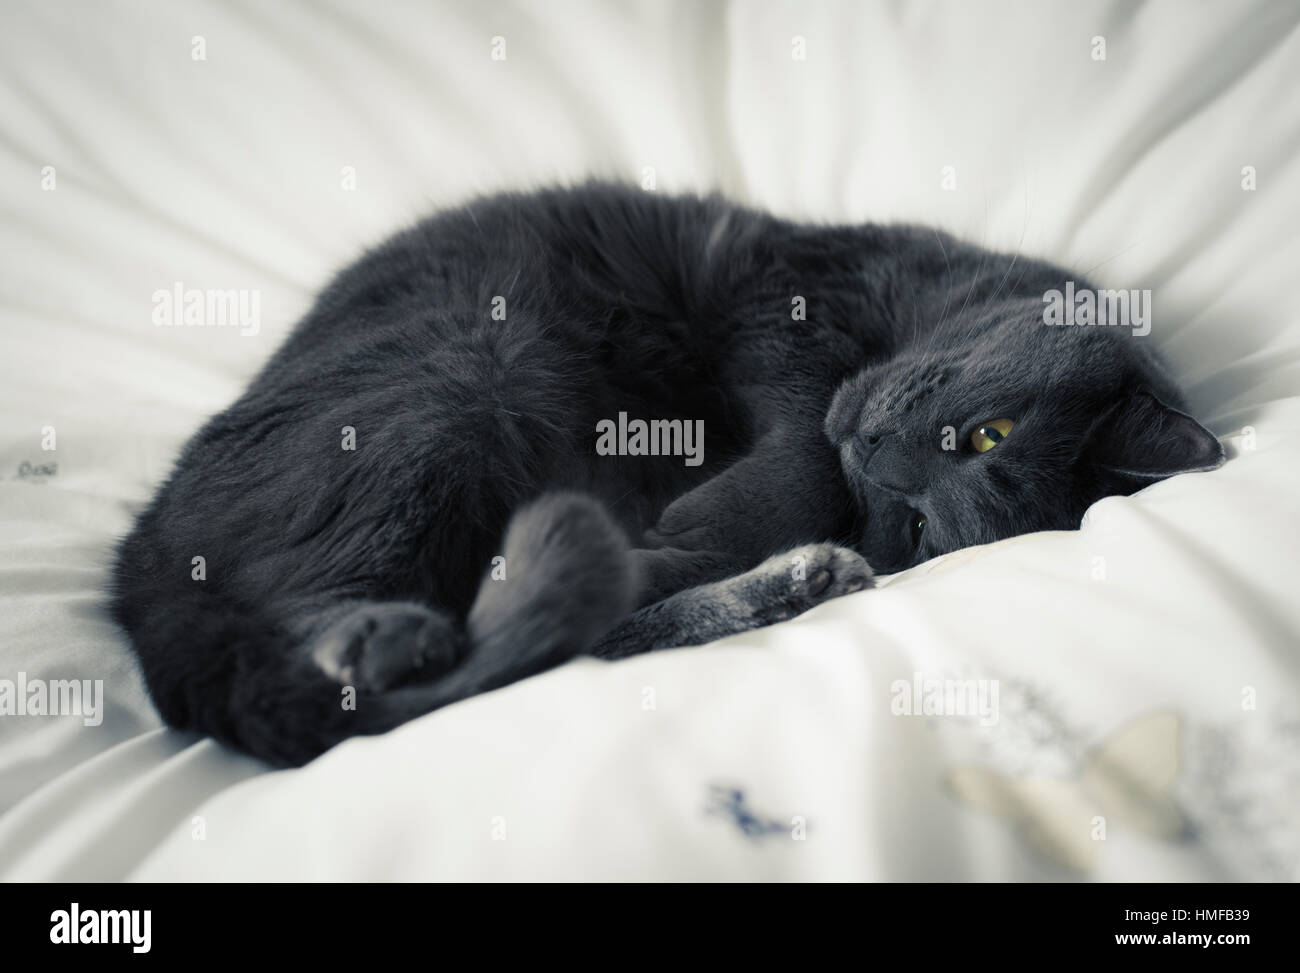 Cat curled up on white bedding Stock Photo